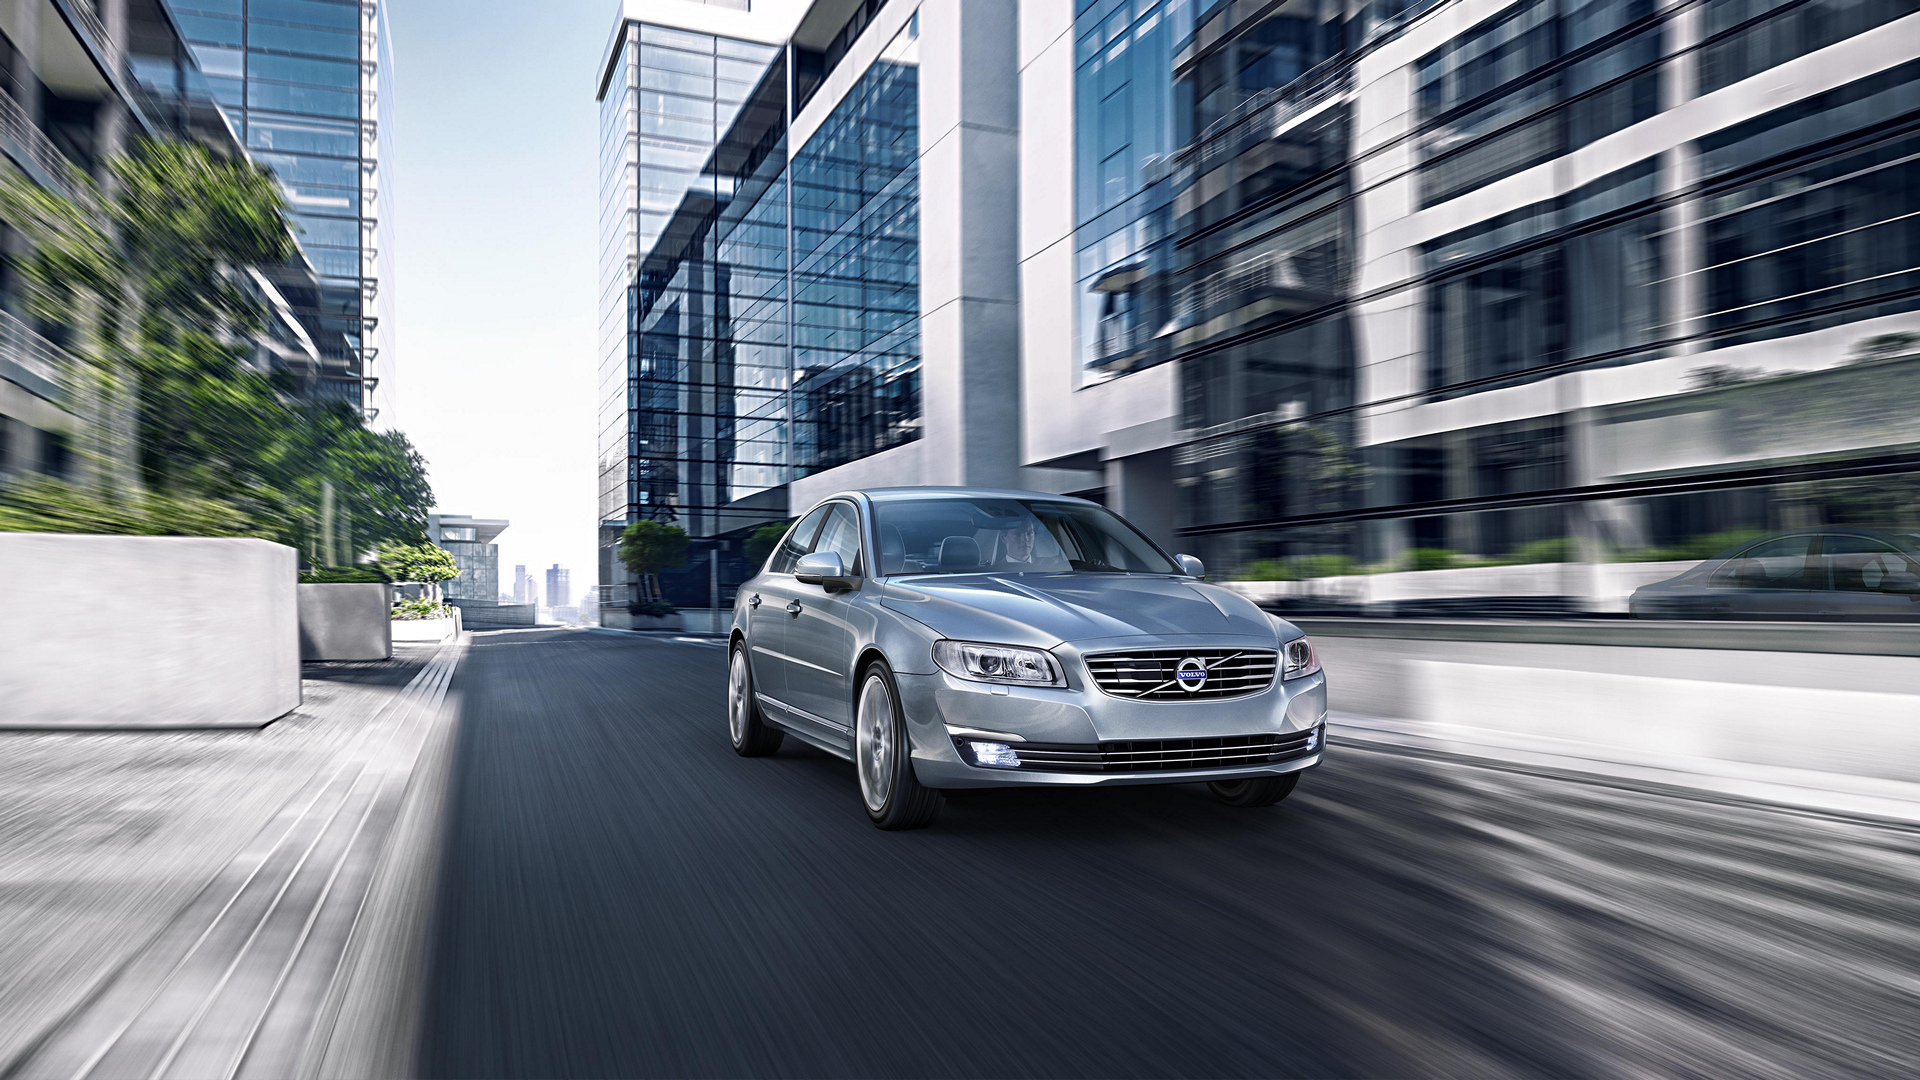 2016 Volvo S80 © Zhejiang Geely Holding Group Co., Ltd